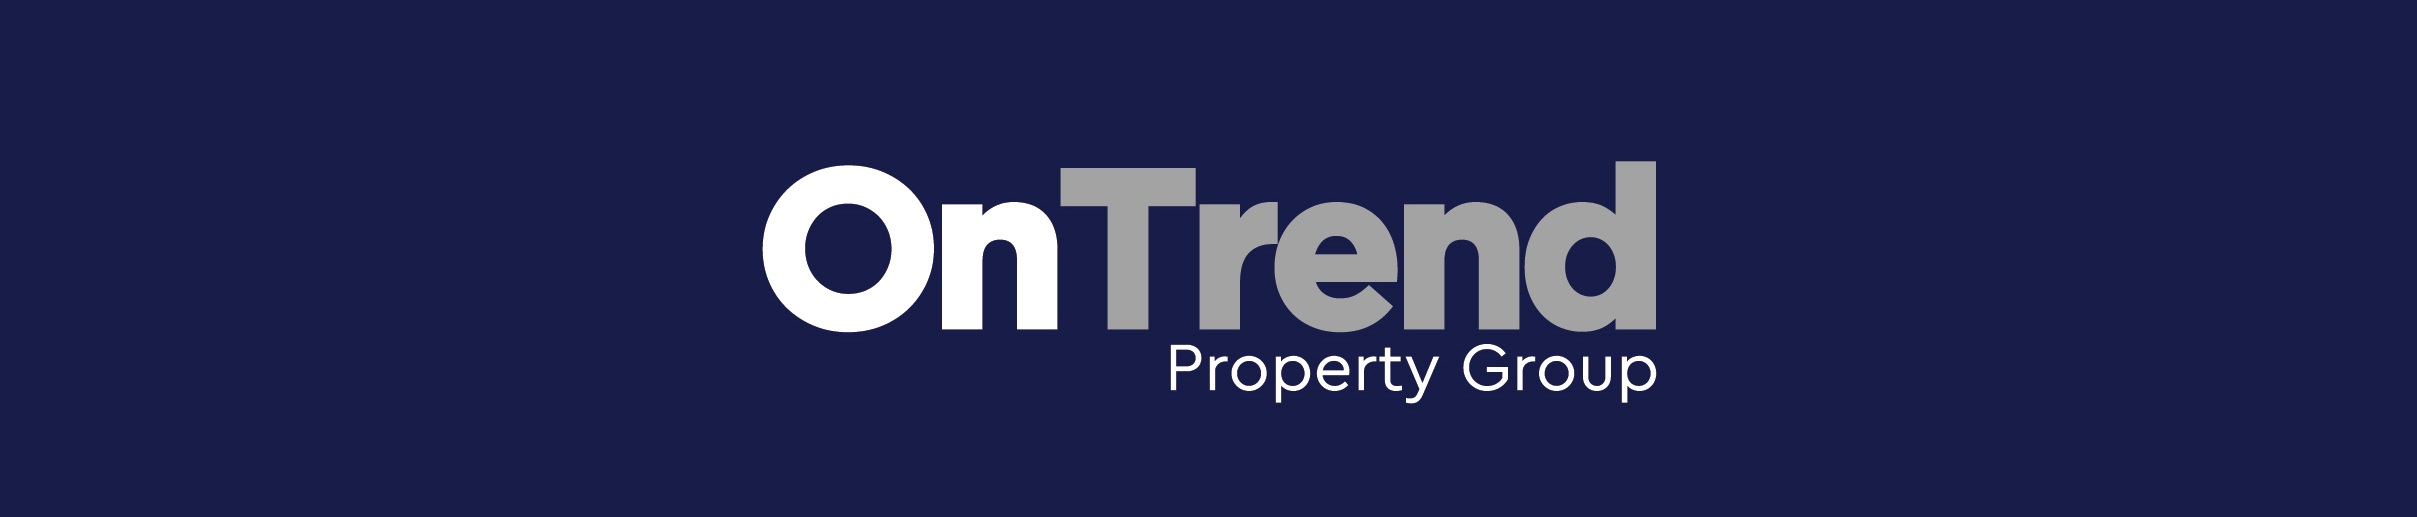 OnTrend Property Group - 